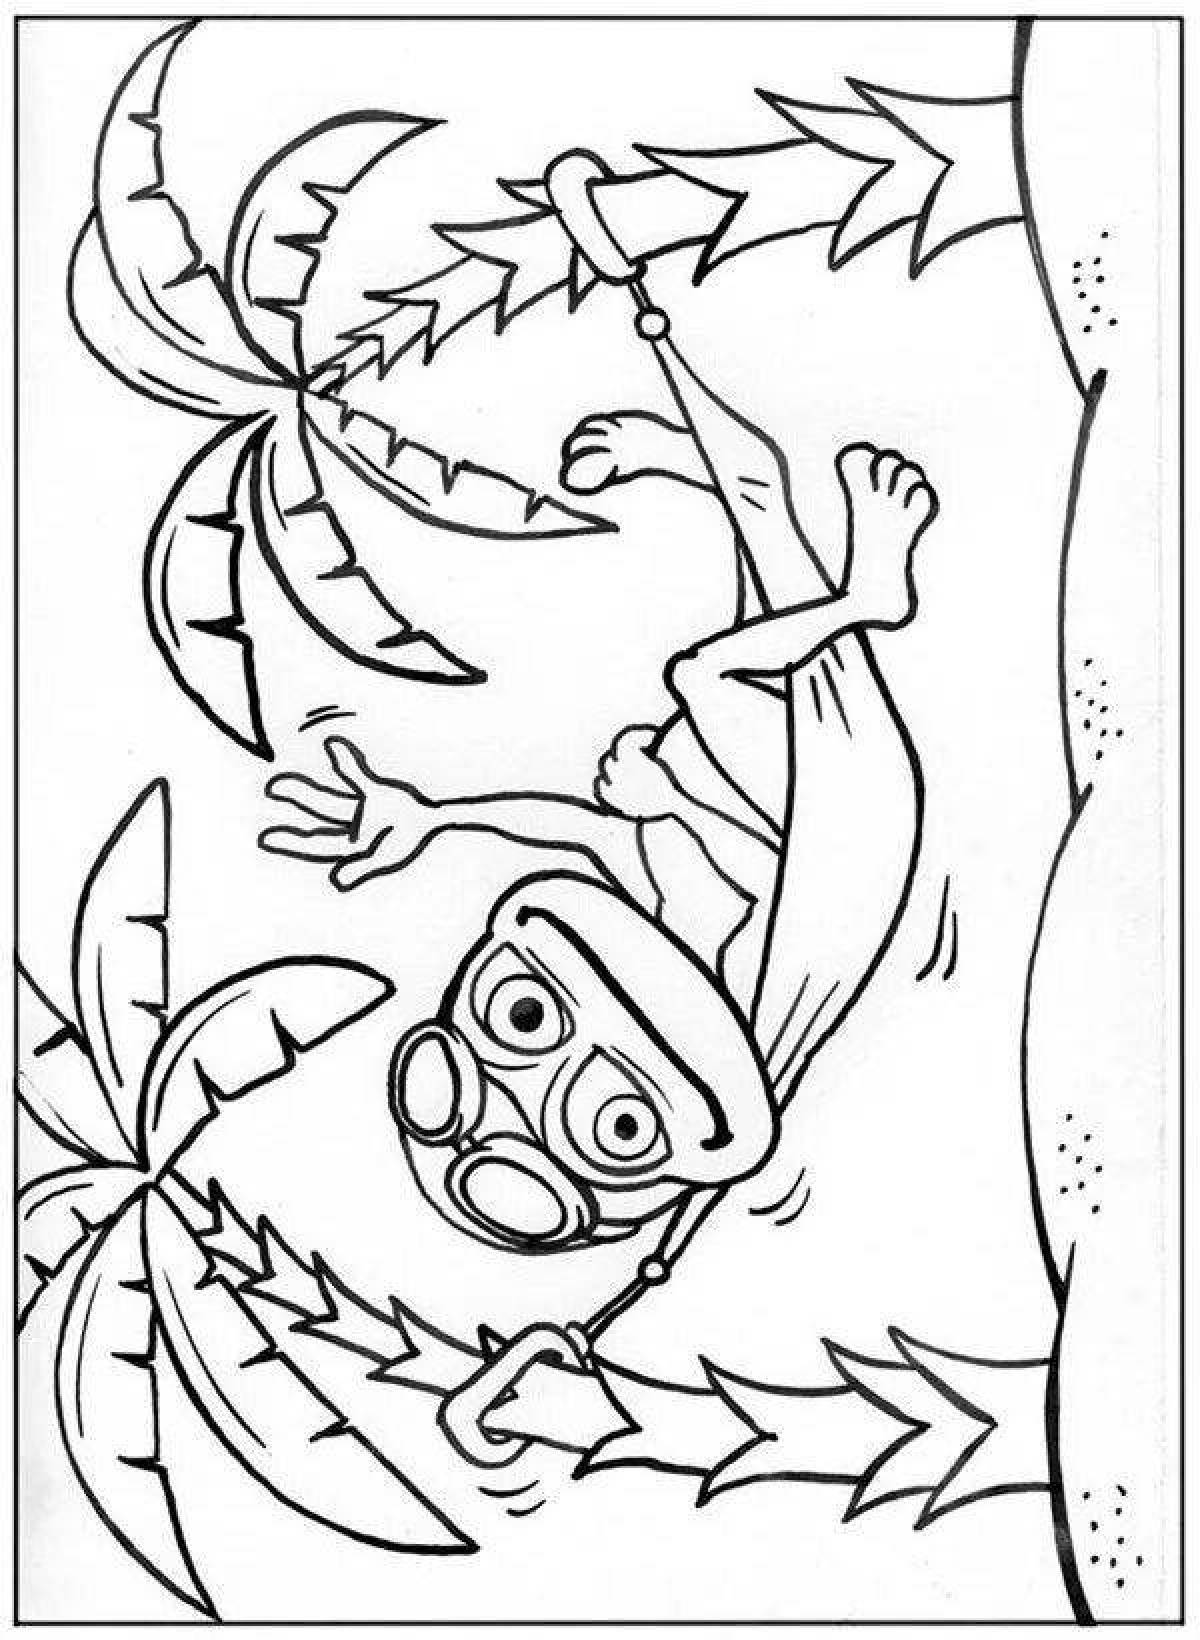 Fabulous crazy frog coloring book